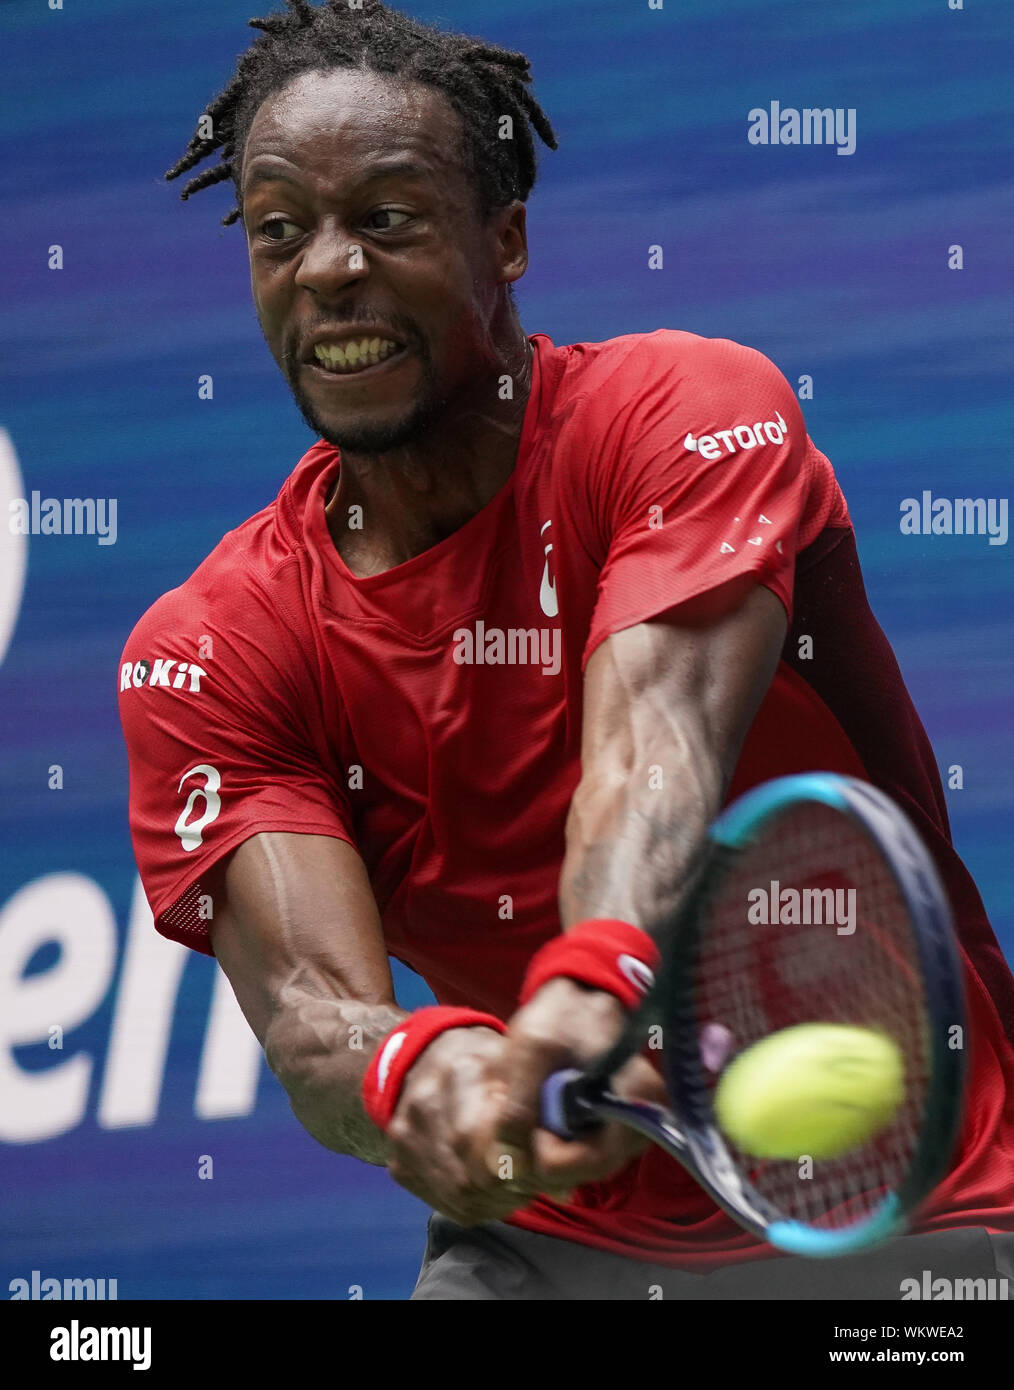 Gael Monfils, of France, returns to Matteo Berrettini, of Italy, during the quarterfinals of the U.S. Open tennis championships Wednesday, Sept